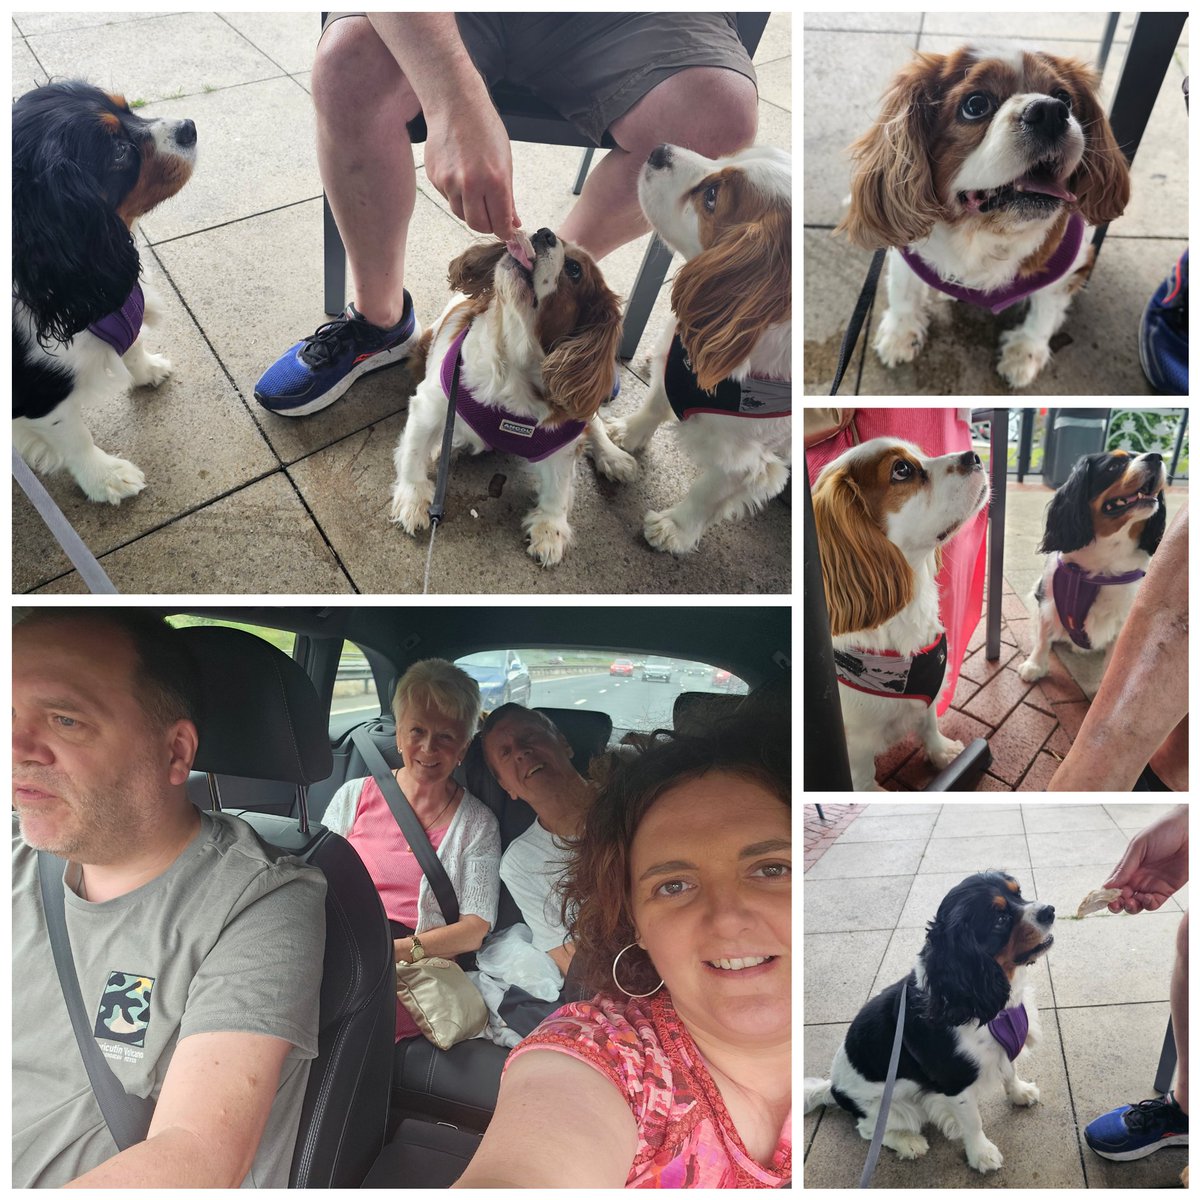 Roadtrip with the doggies today with a quick pitstop enroute for breakfast 😍
#cavpack #dogfamily #dayout